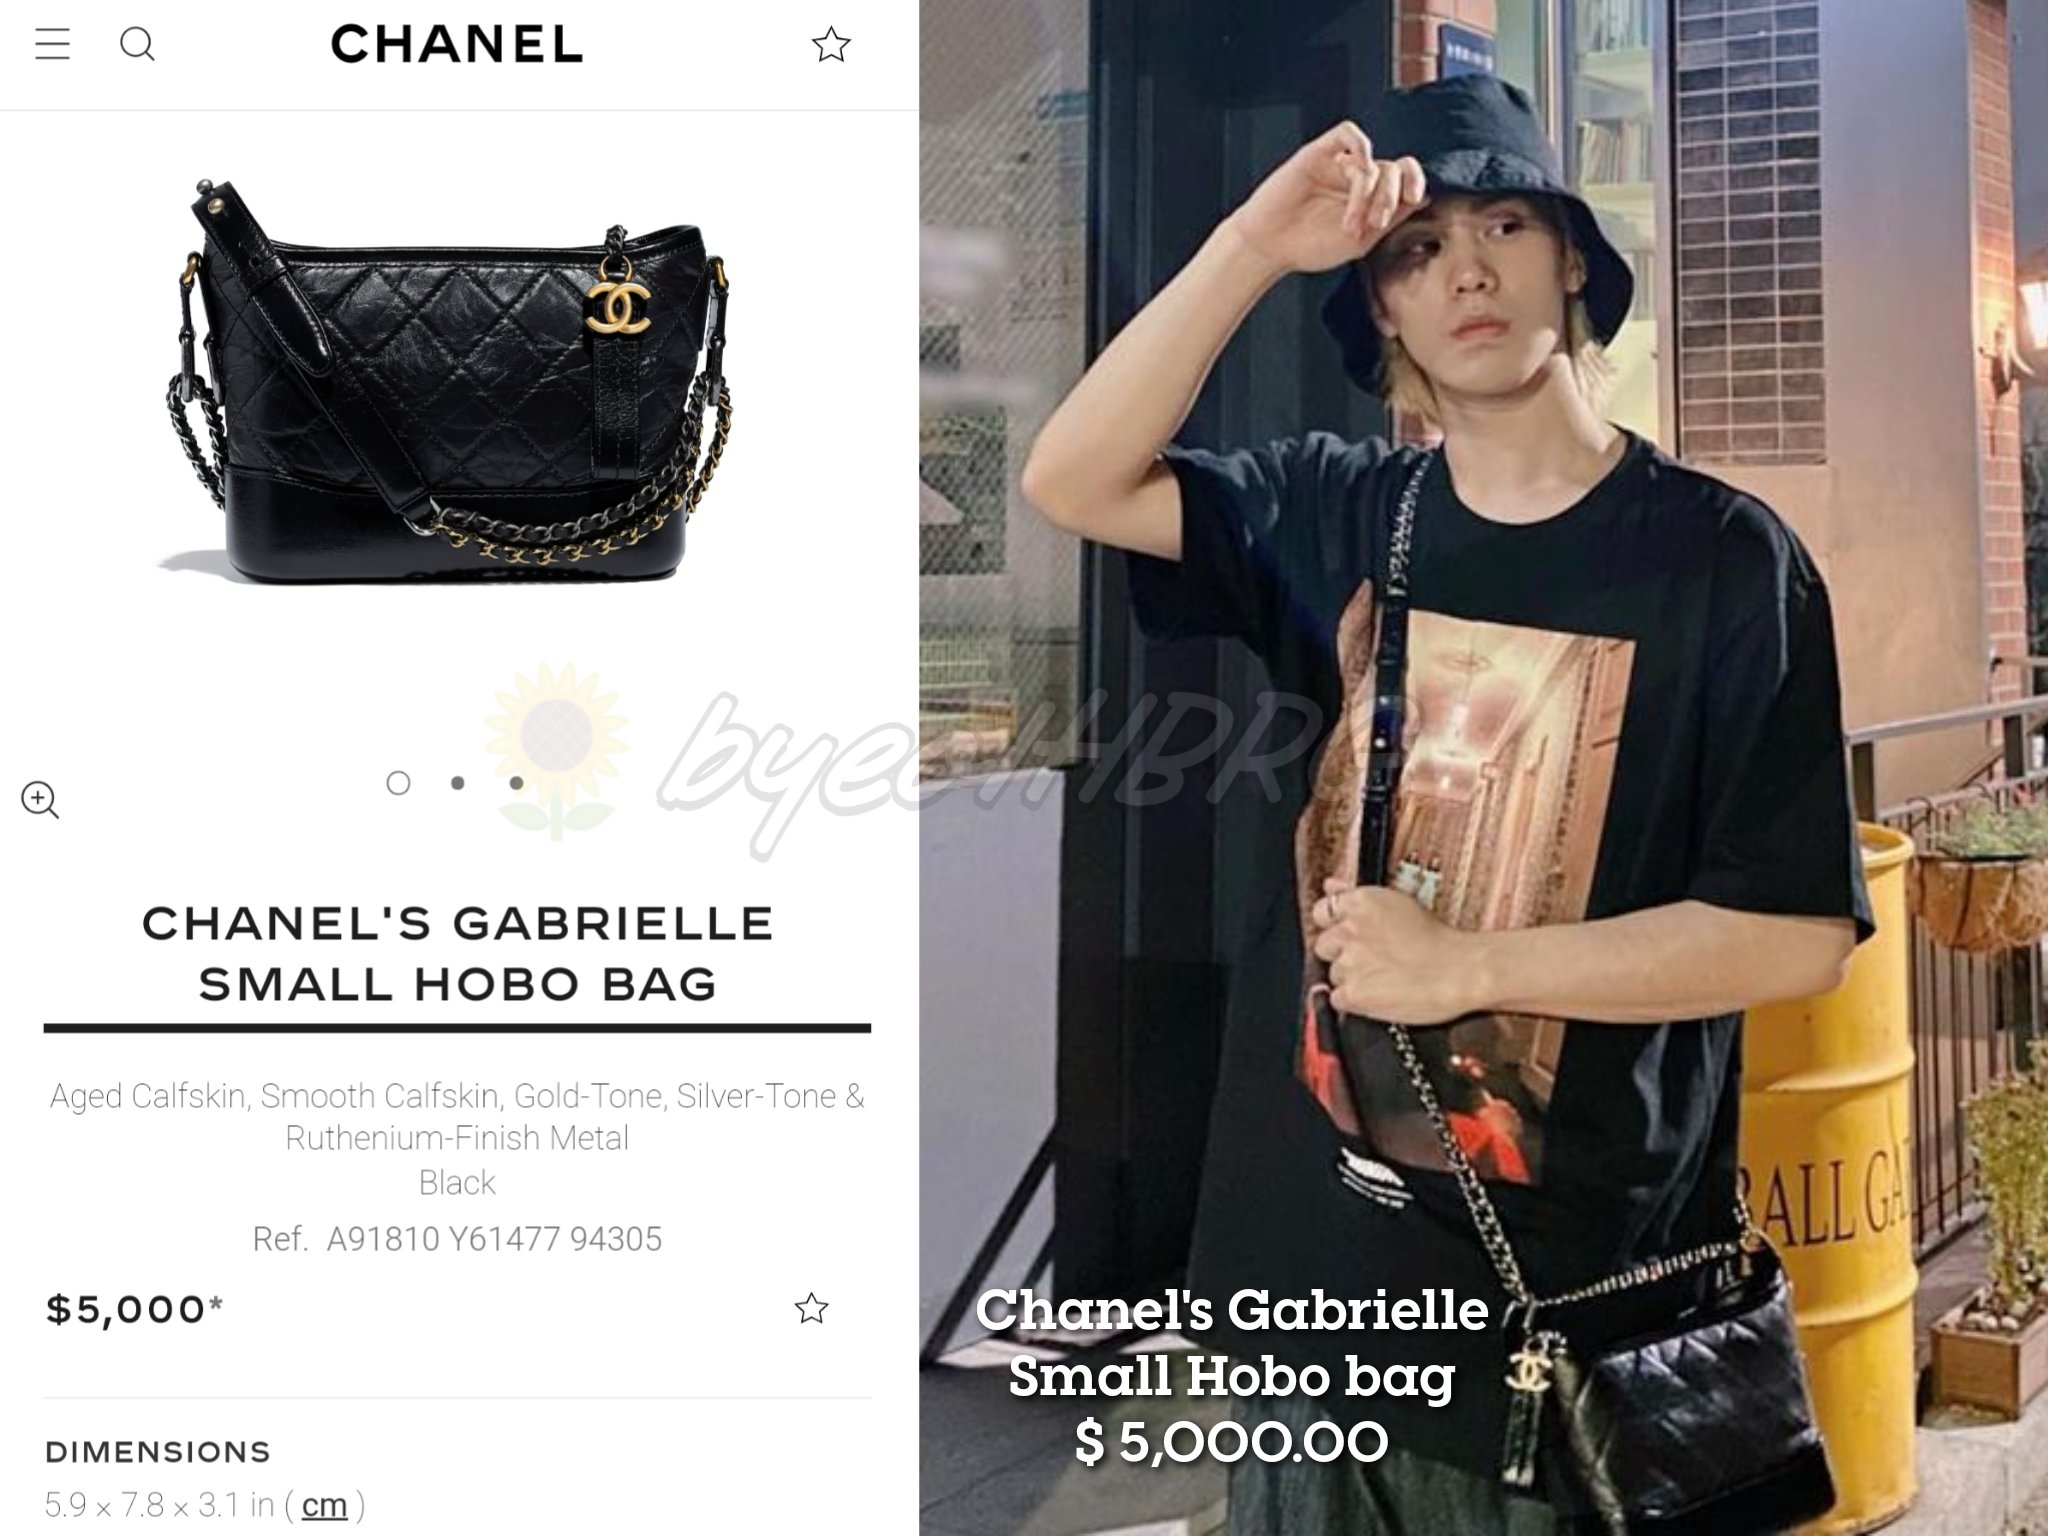 CHANEL 2022 SS Chanel's Gabrielle Hobo Bag (AS1521 Y61477 94305)